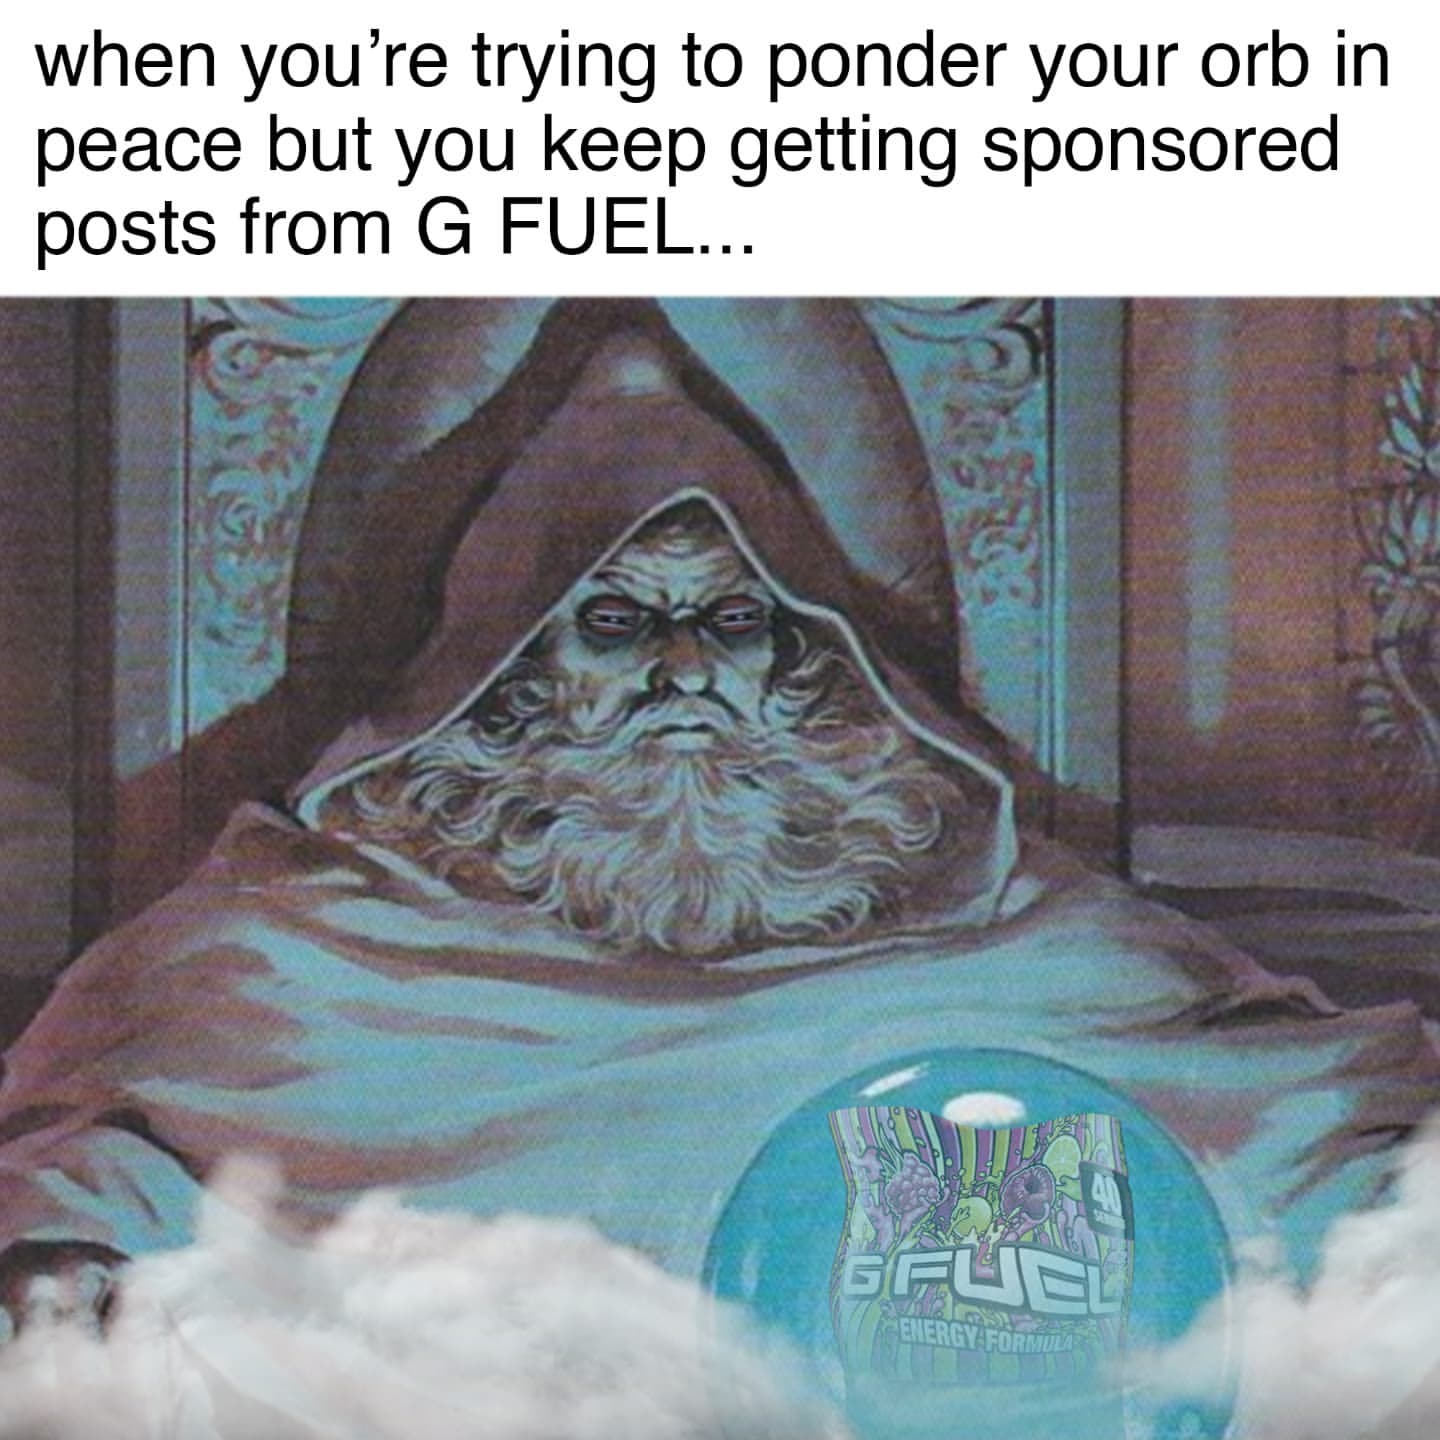 When you're trying to ponder your orb in peace but you keep getting sponsored posts from G FUEL...